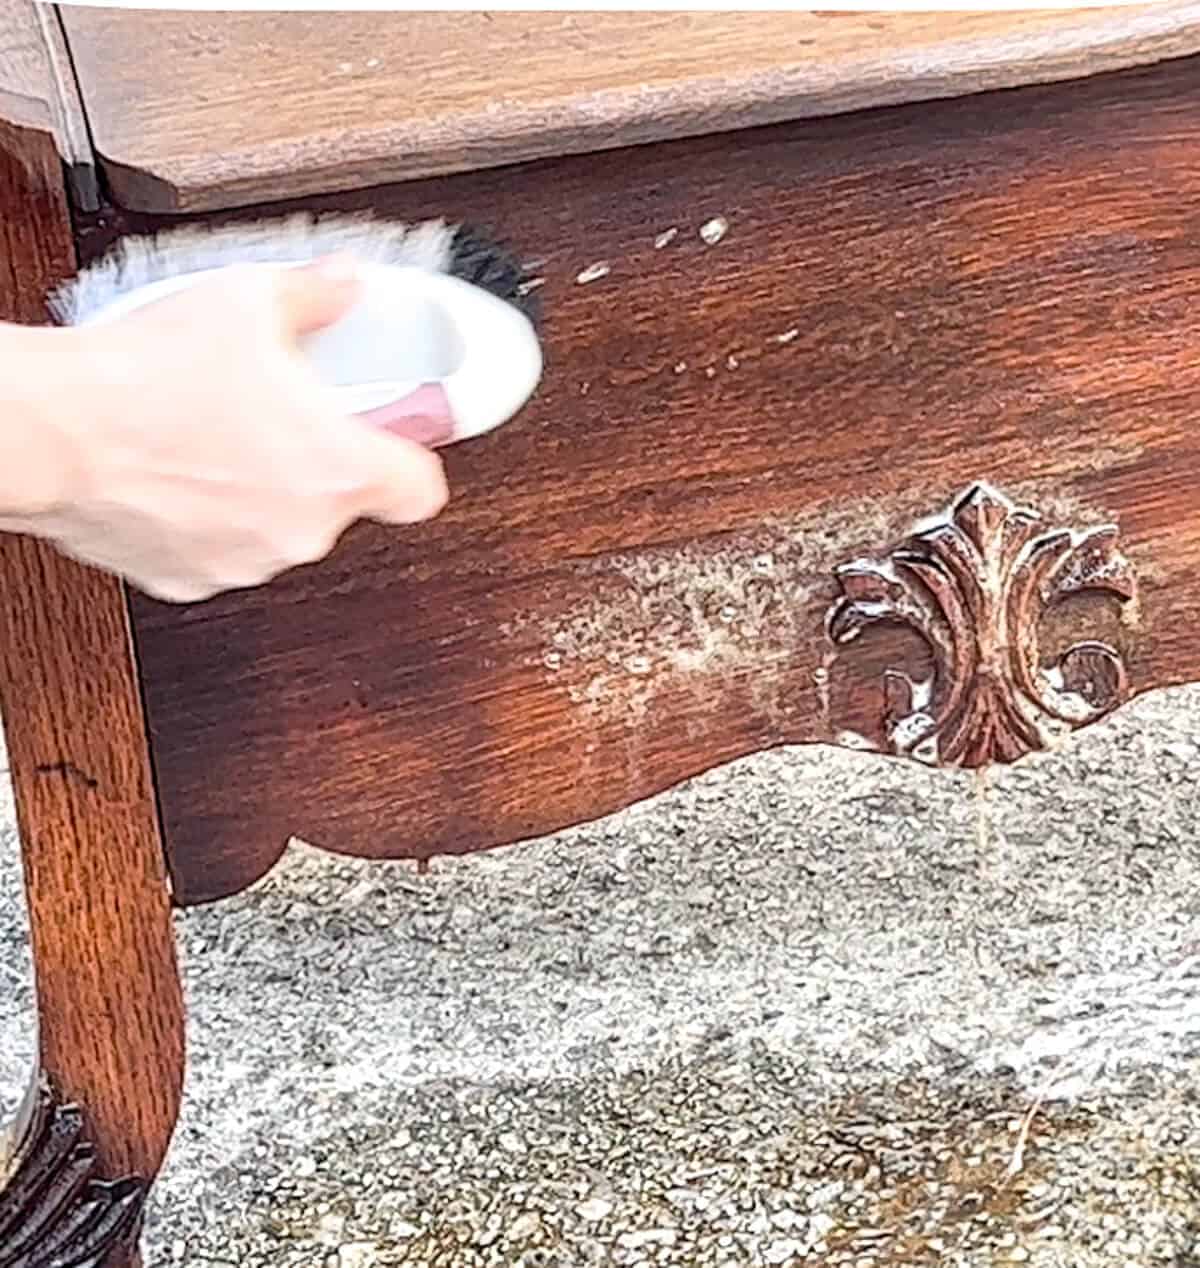 scrubbing wood with oven cleaner